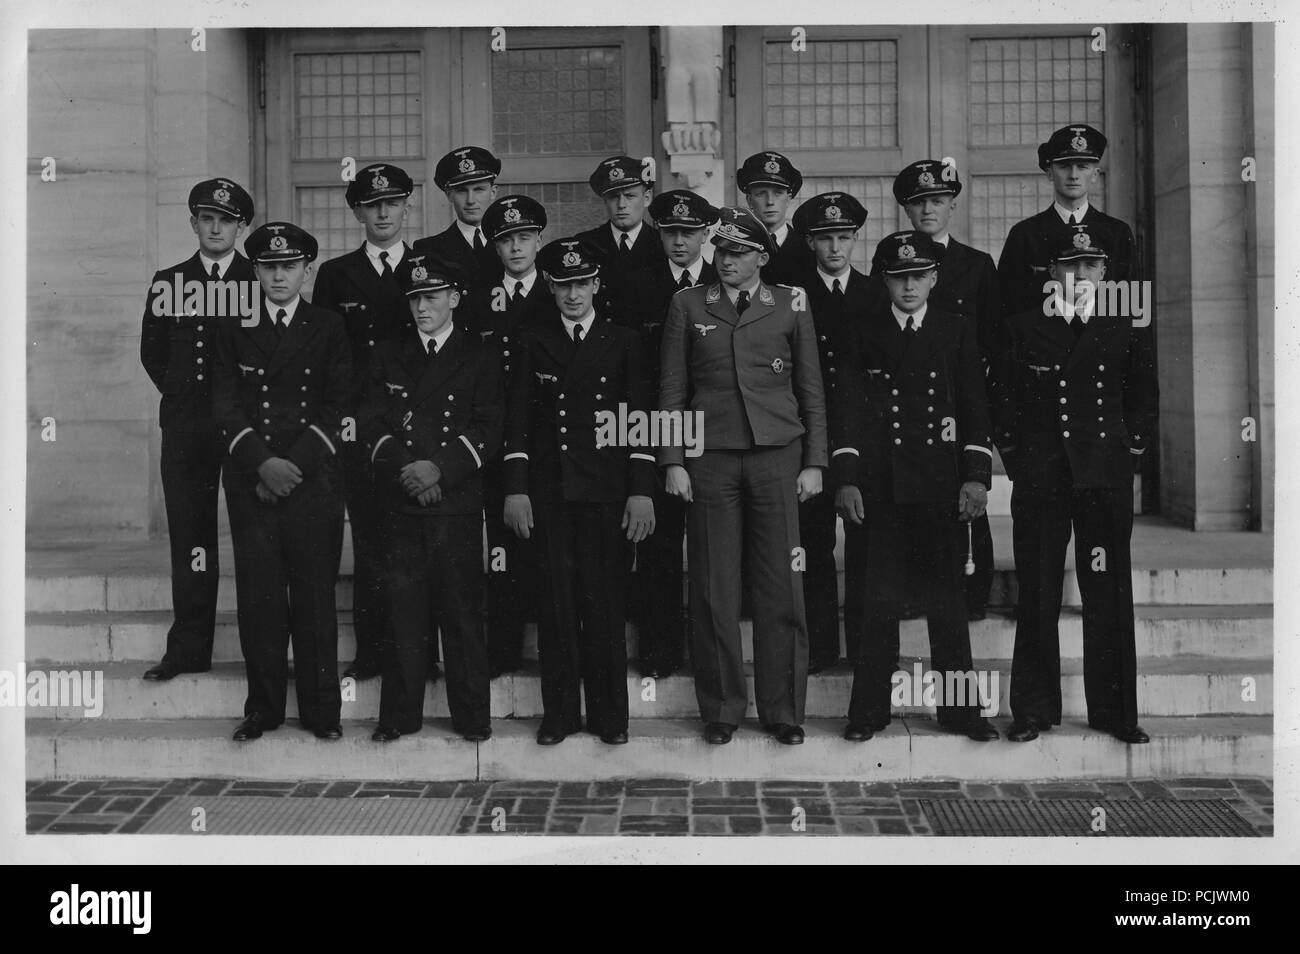 Image from the photo album of Oberleutnant Wilhelm Gaul: Luftwaffe Observer Oberleutnant Willi Gaul of 1. Staffel, Küstenfliegergruppe 106 (in Luftwaffe uniform) poses with officers of the Kriegsmarine outside the Officer's Mess at Château Haut Brian near Bordeaux. Stock Photo